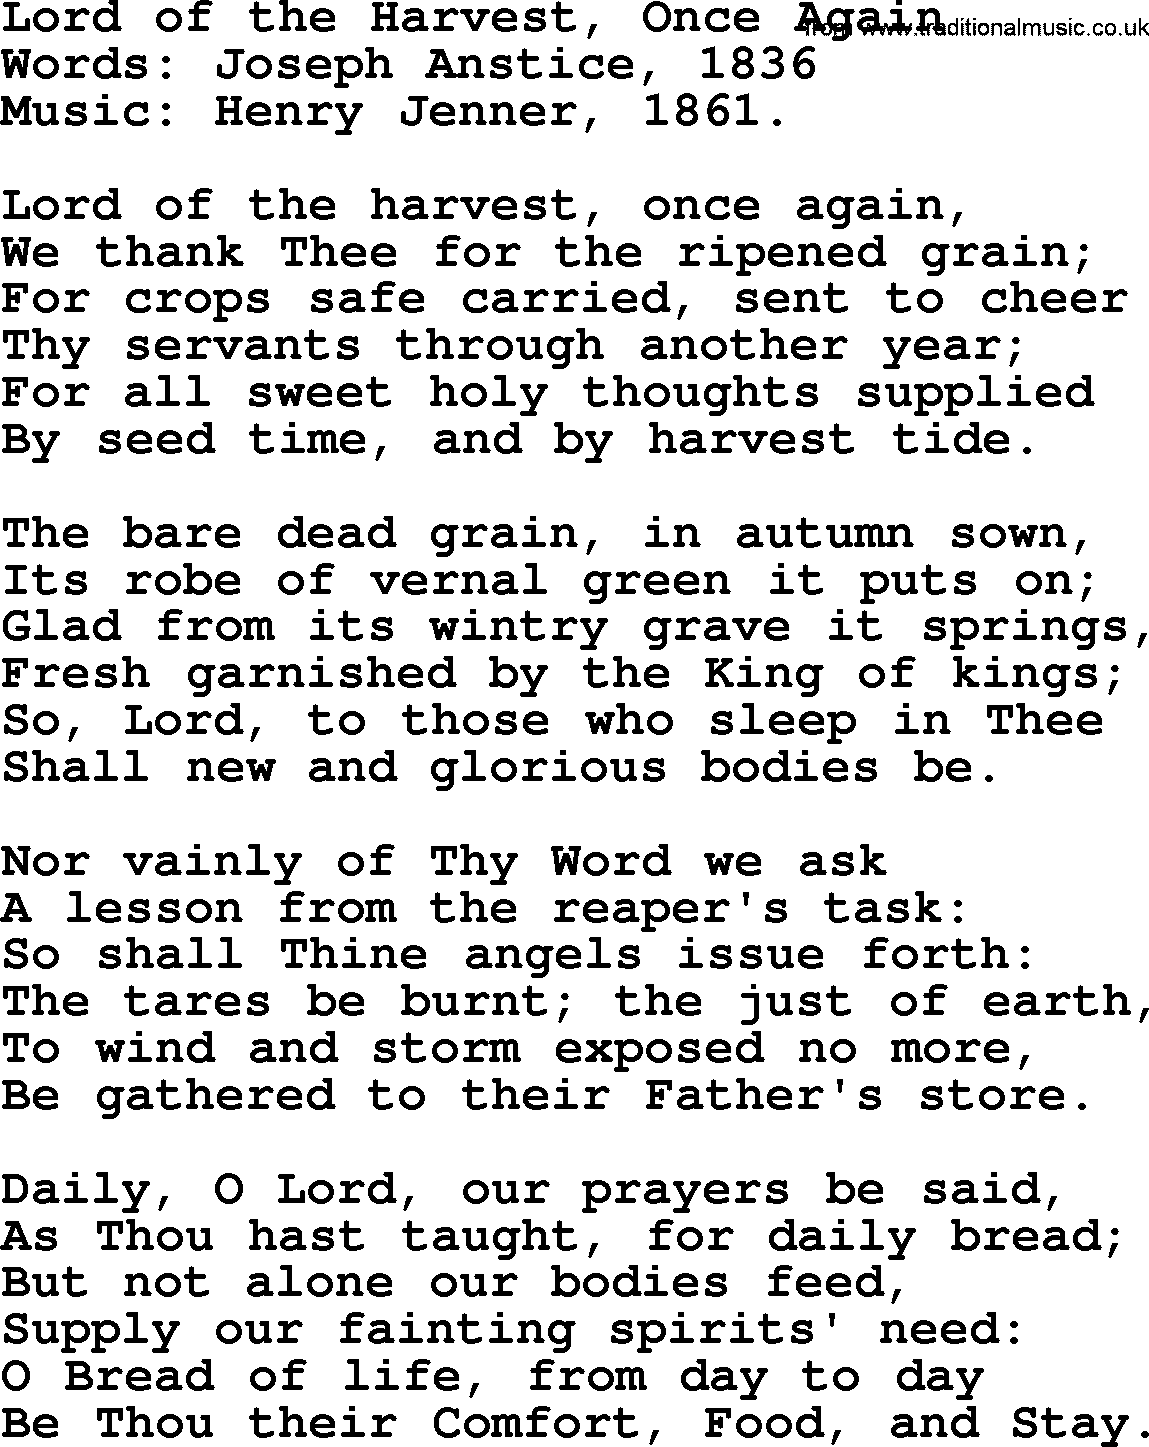 Thanksgiving Hymns and Songs: Lord Of The Harvest, Once Again lyrics with PDF